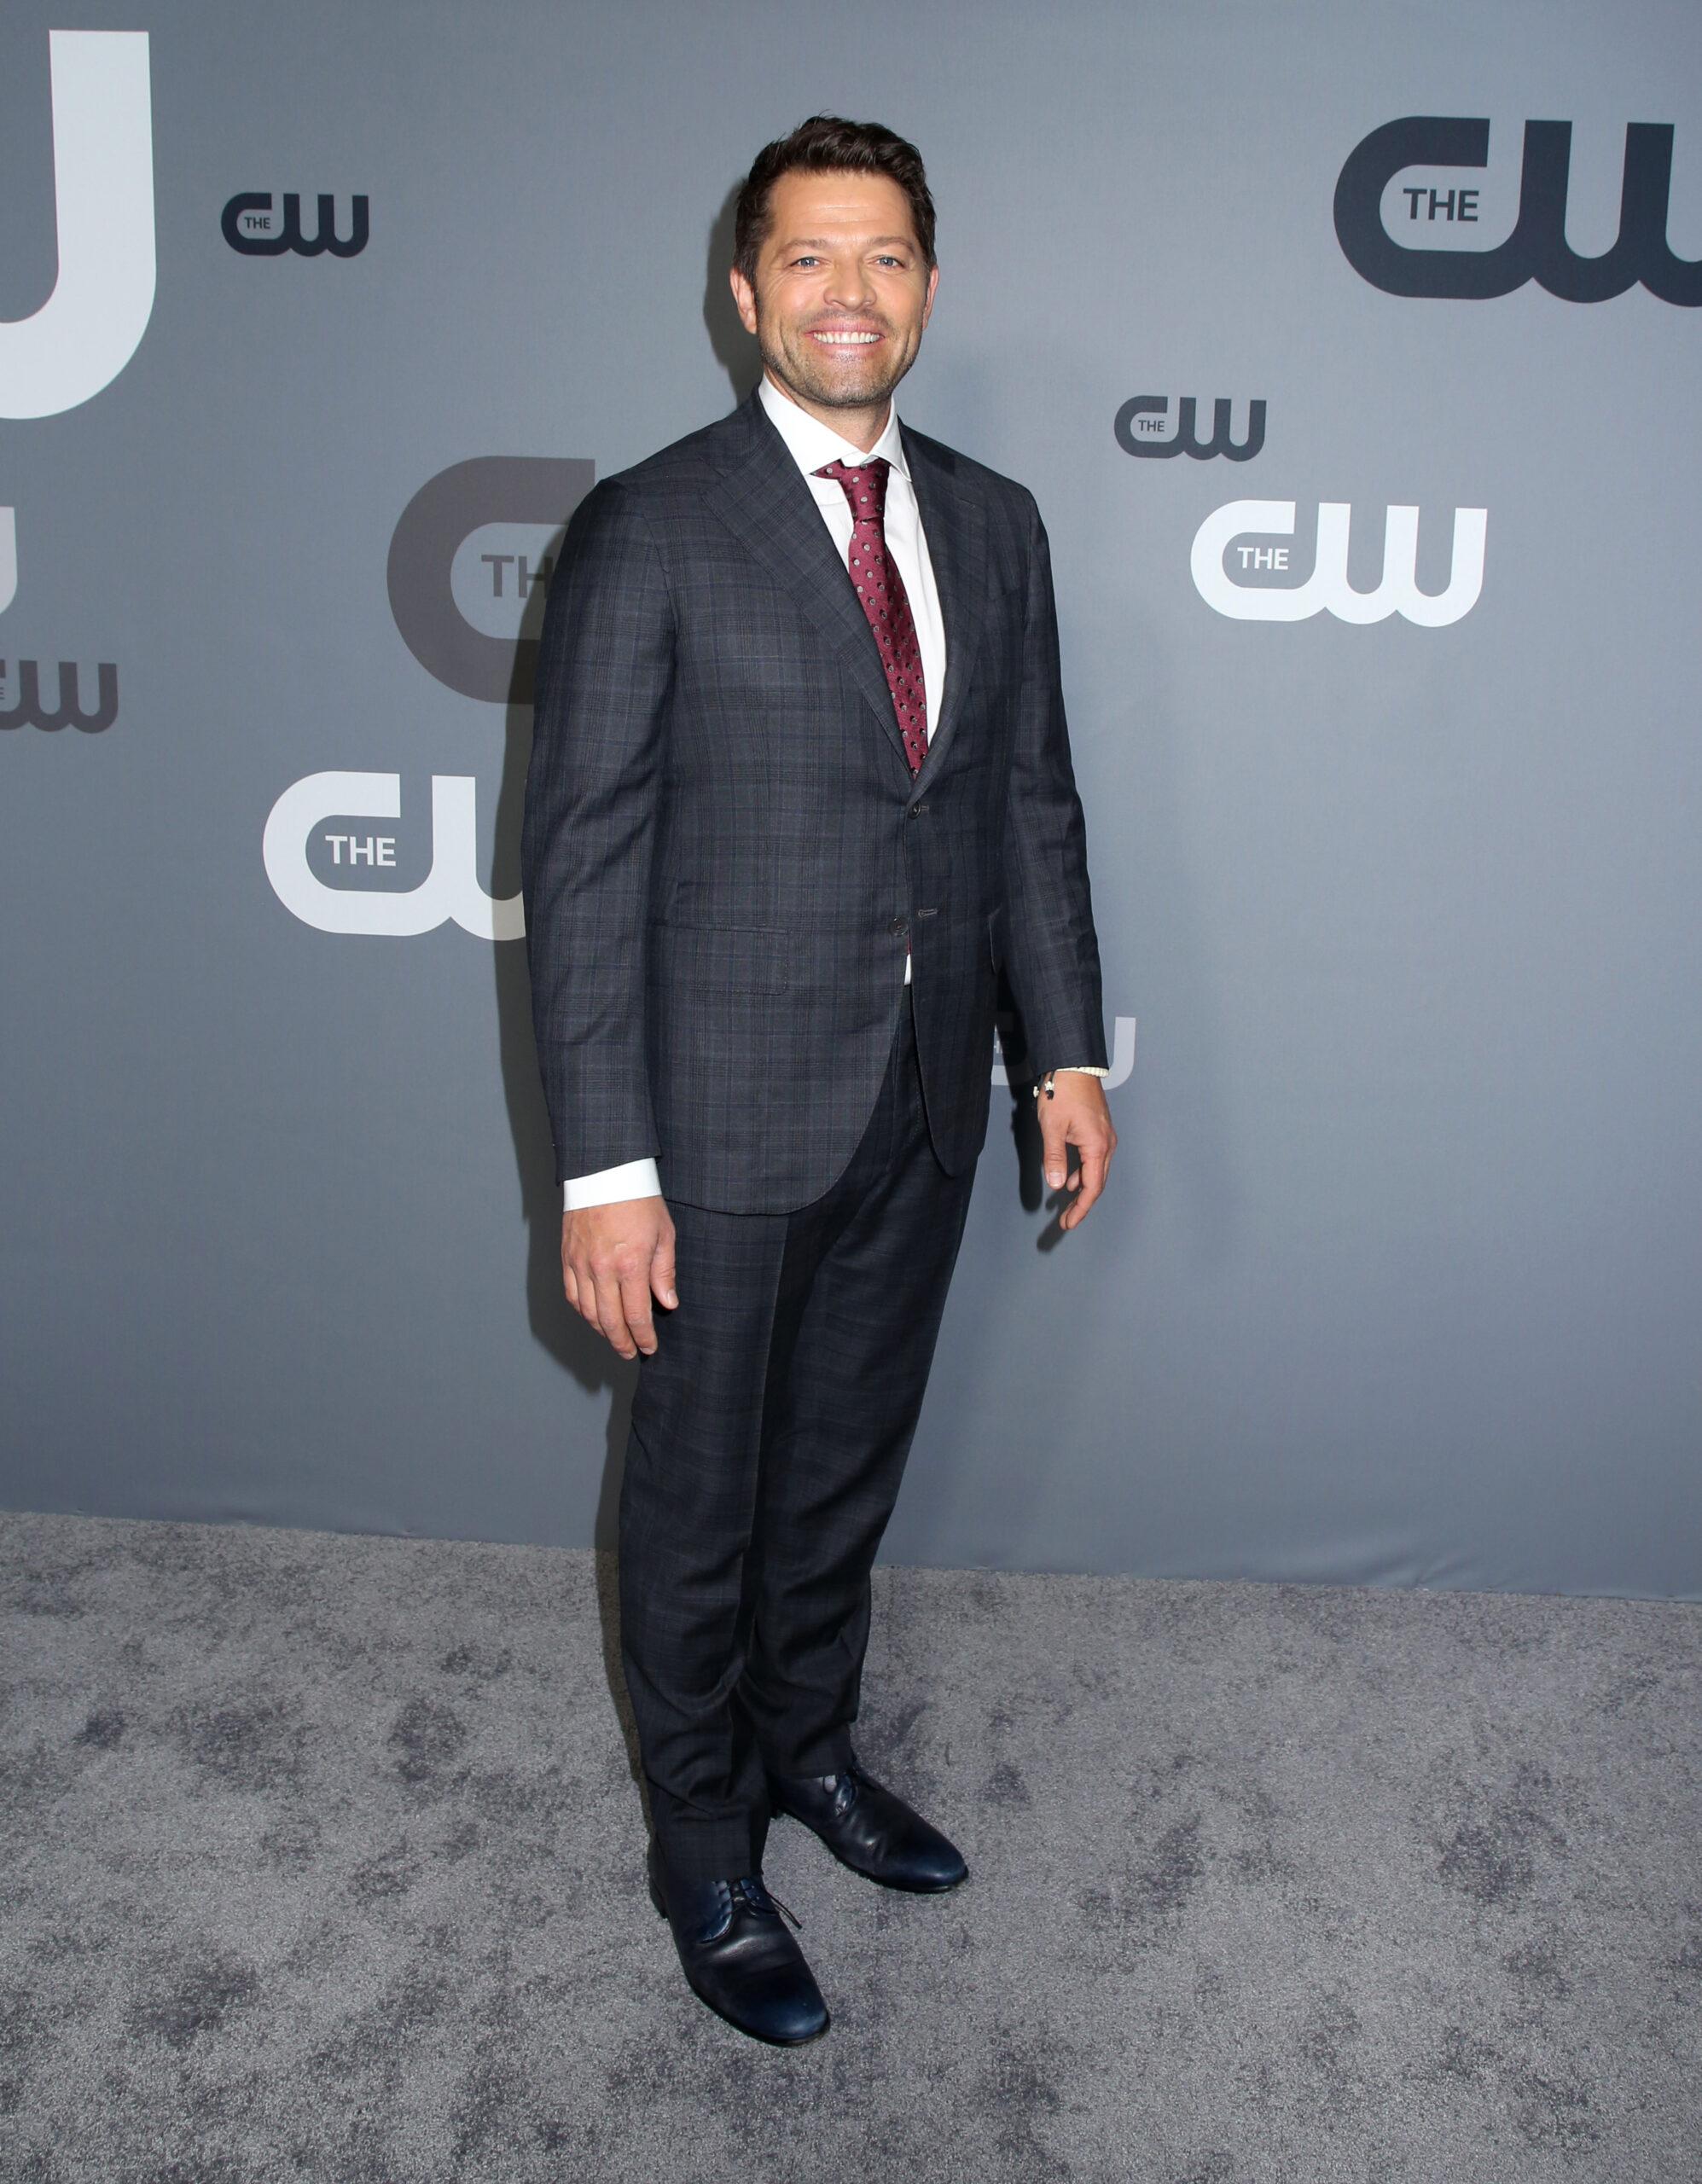 The CW Network 2019 Upfront